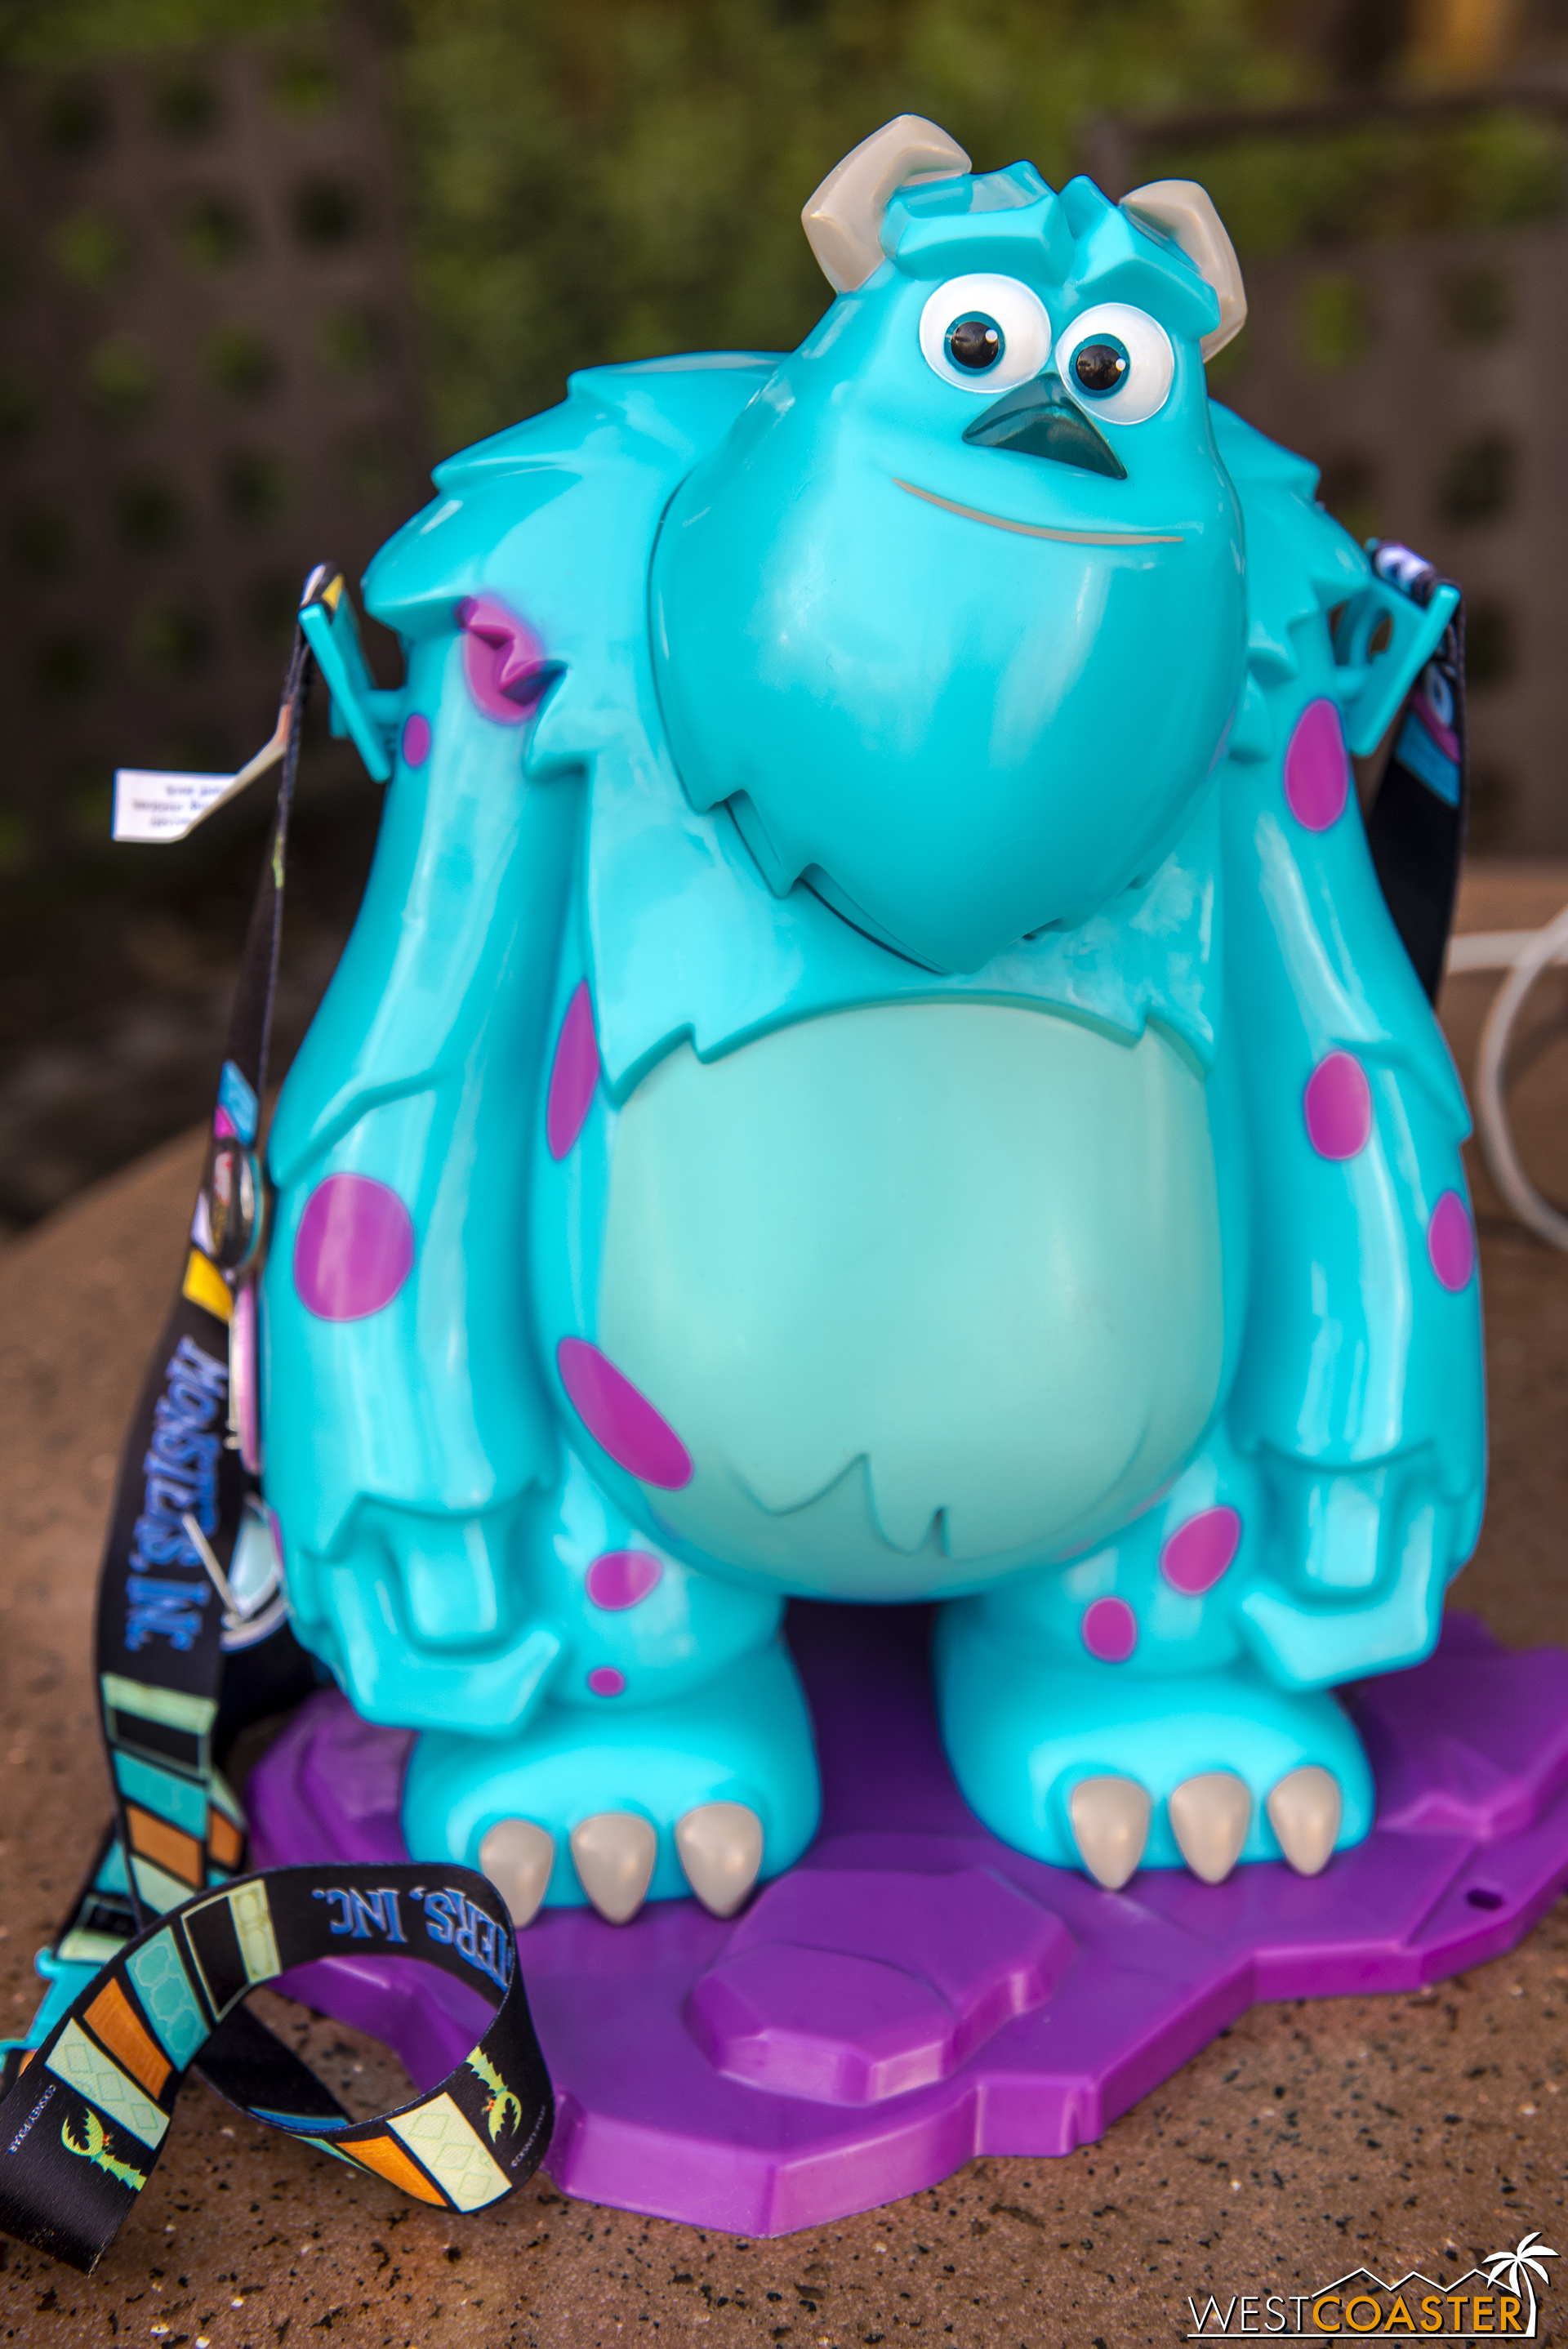  Outside the stores, there are souvenir items at various food stands too, like this pretty fantastic Sulley popcorn bucket. 